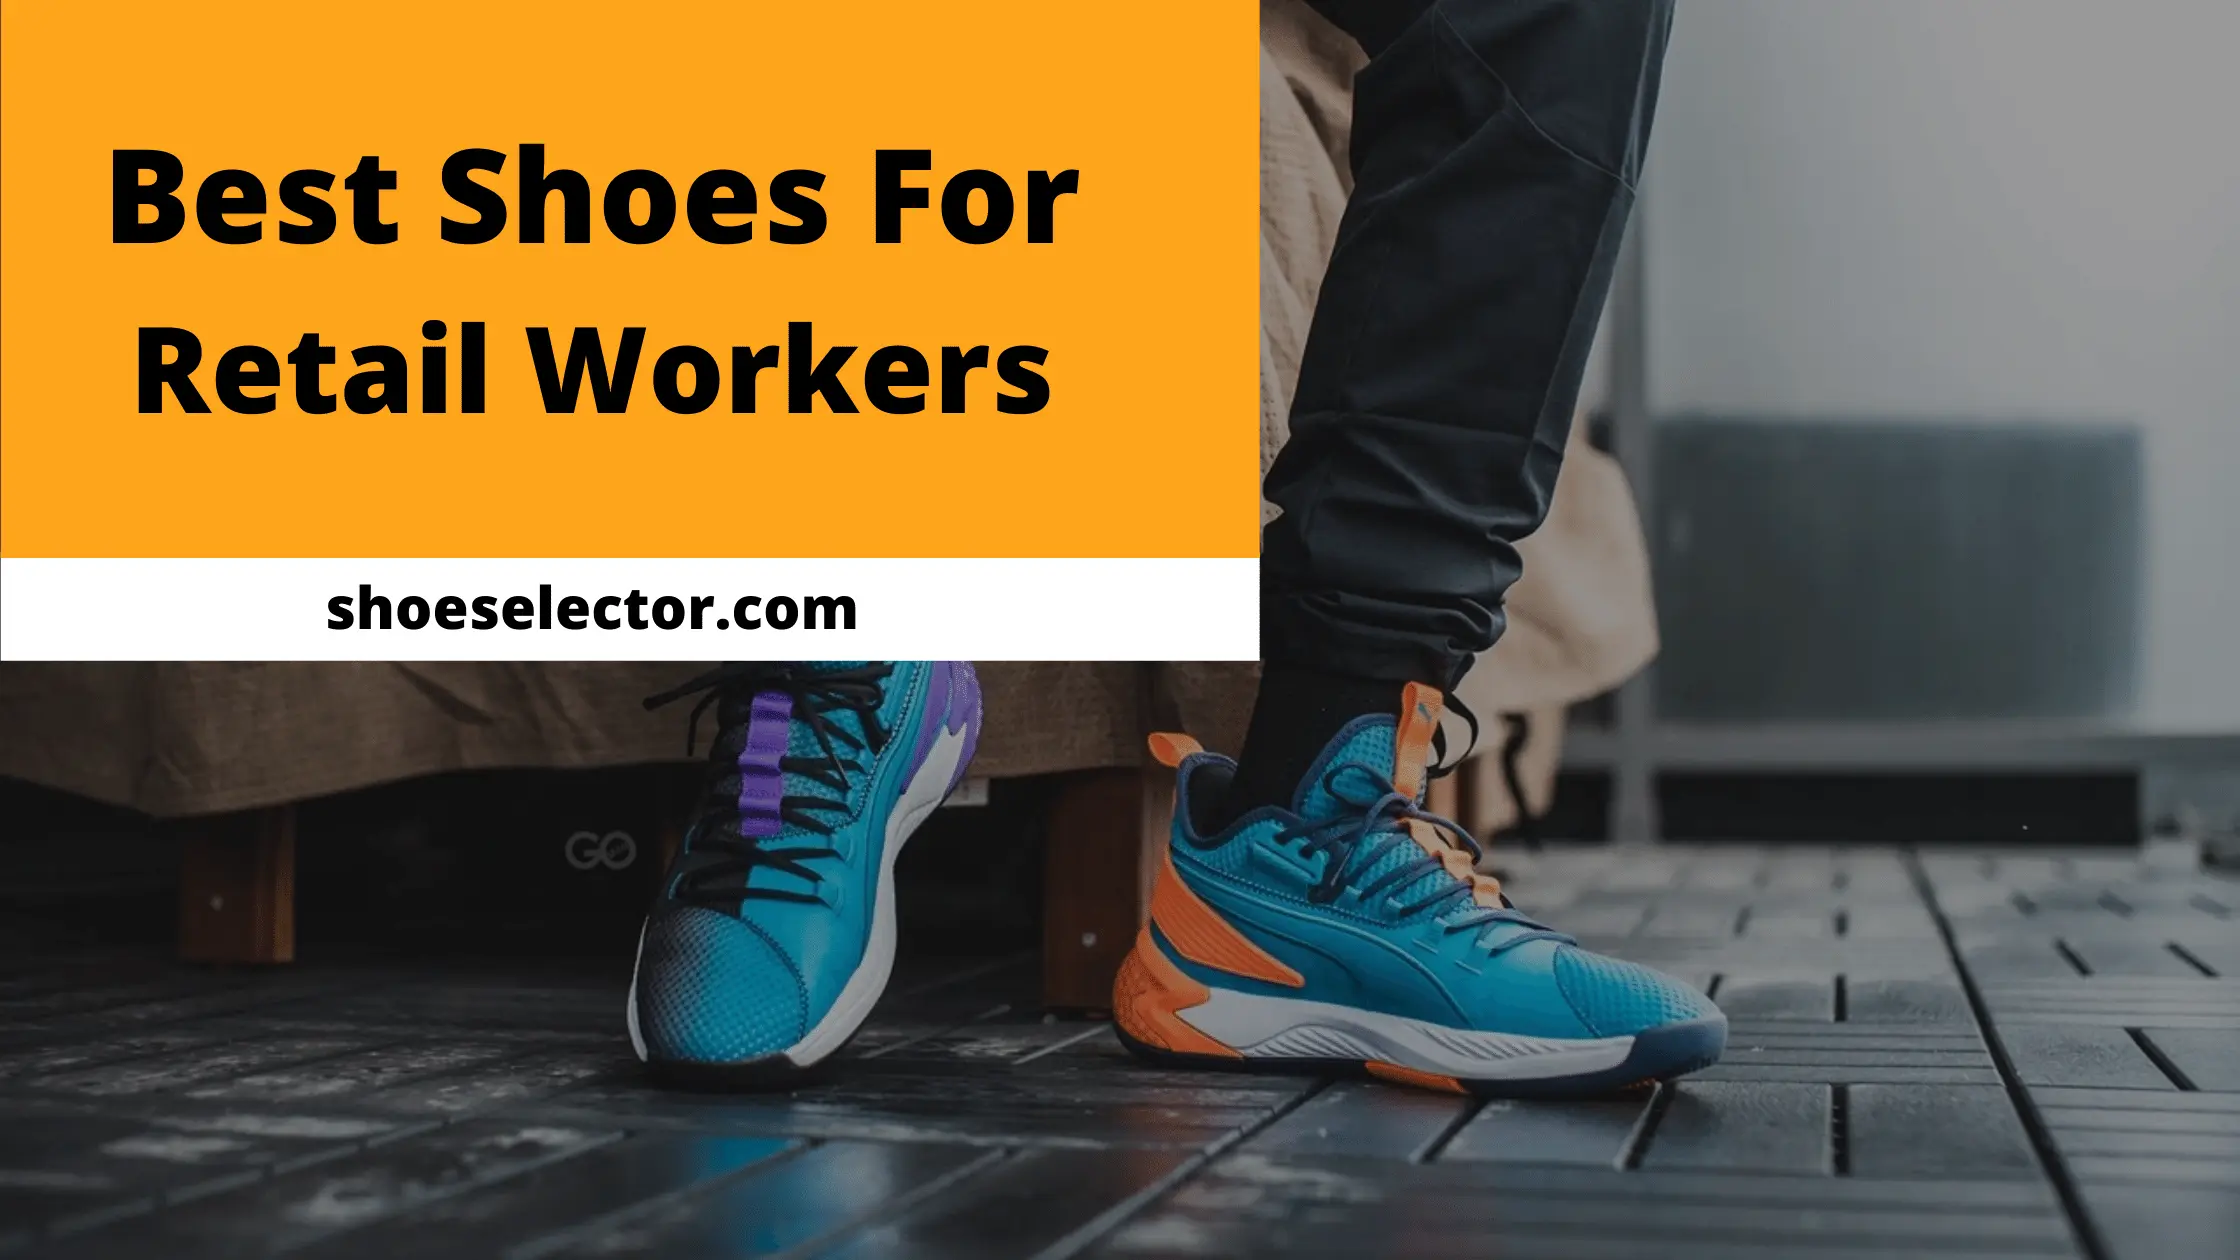 Best Shoes For Retail Workers - Recommended Guide